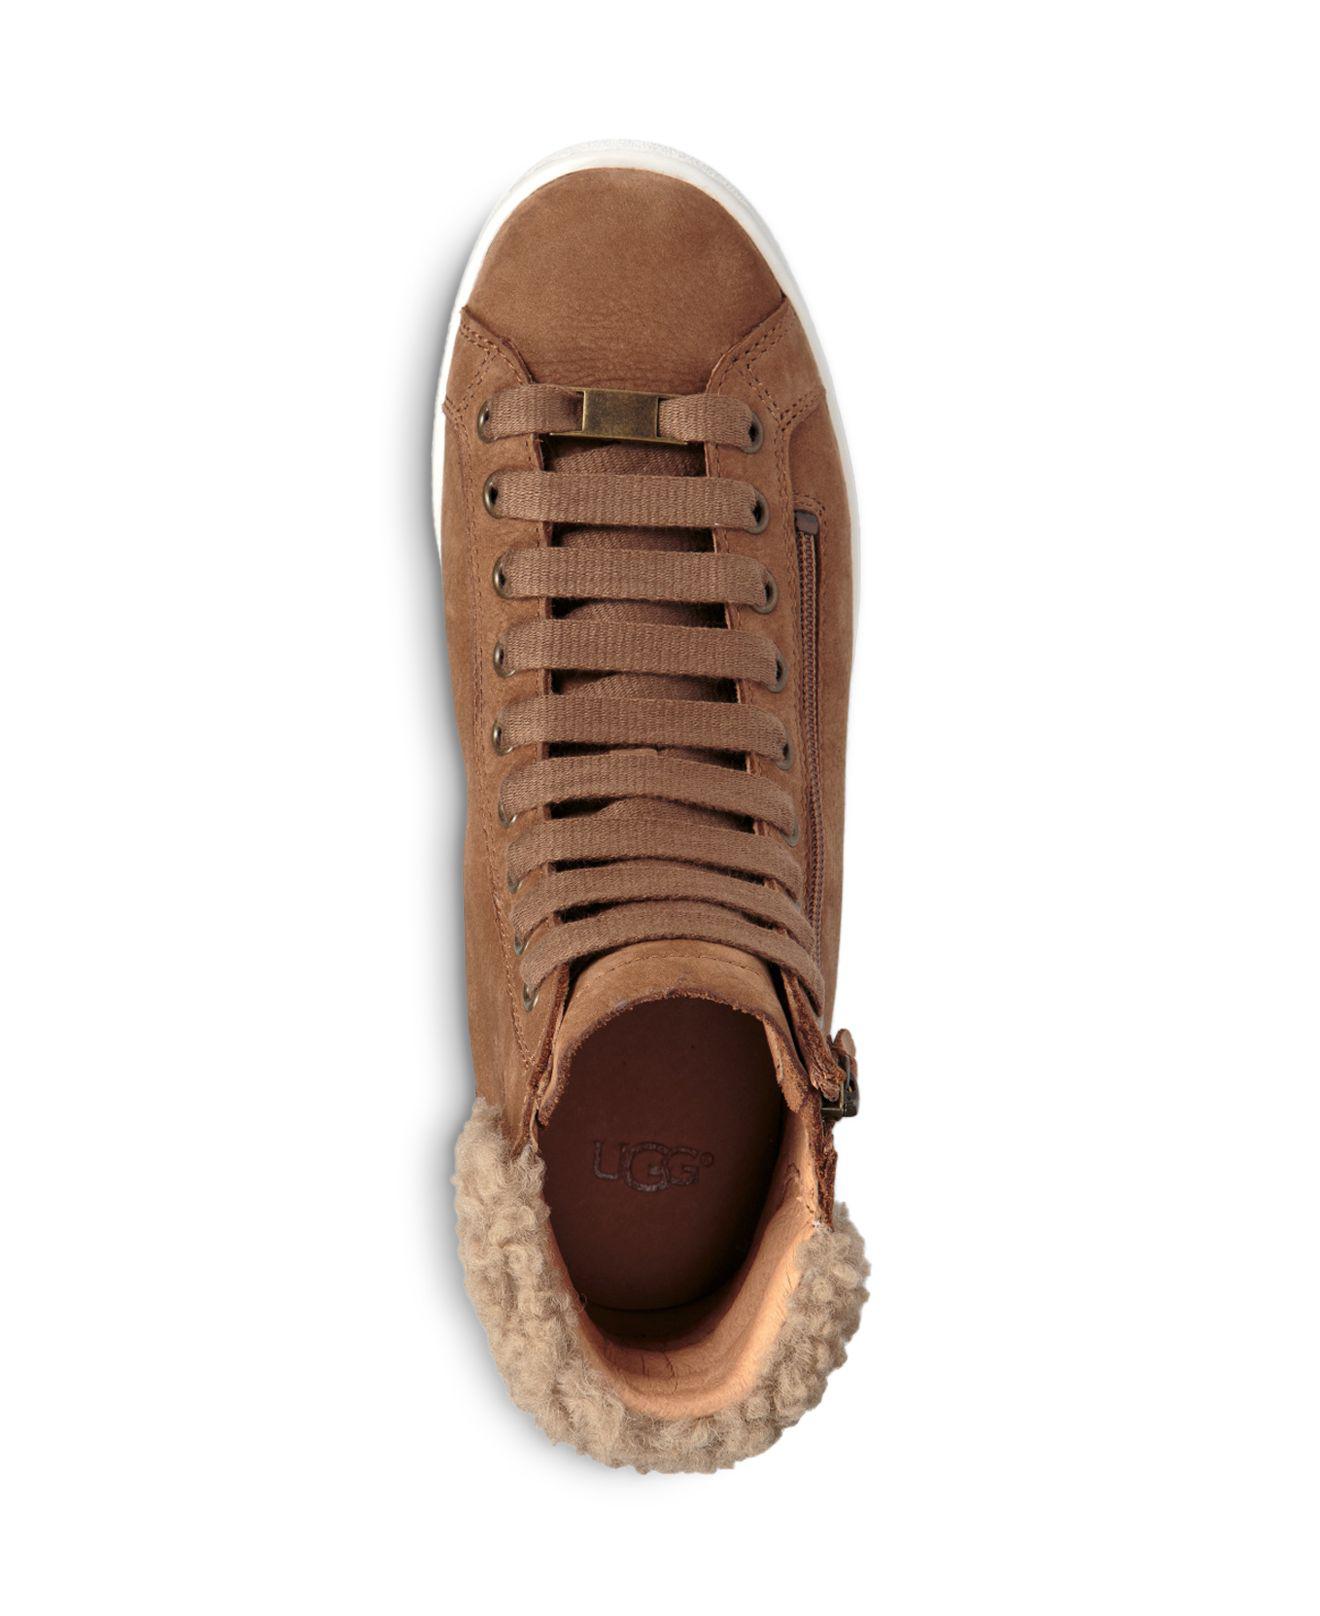 ugg olive leather and sheepskin sneaker